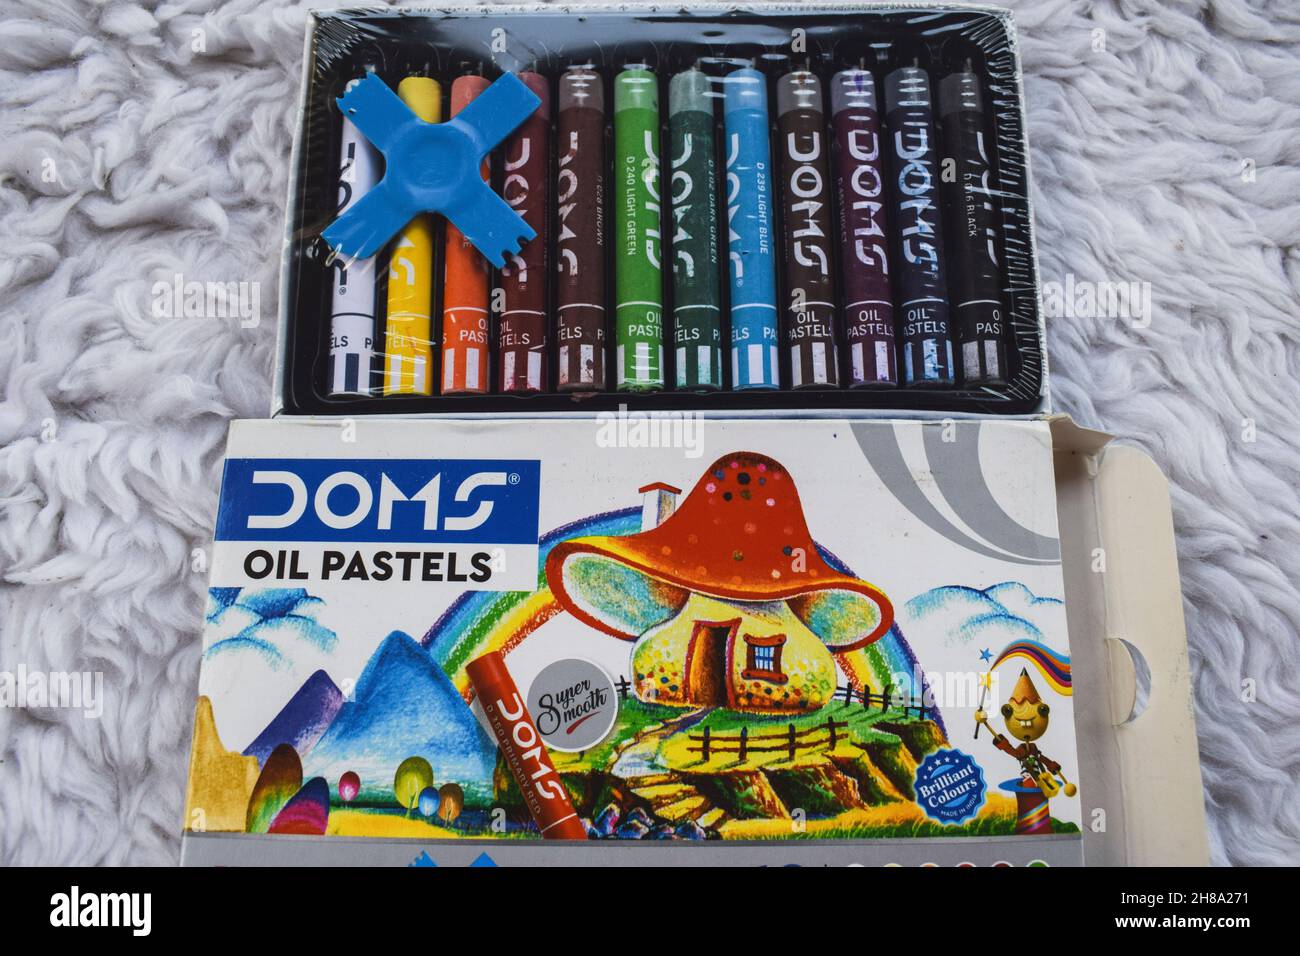 Doms brand Oil pastel colours. Oilpastels package consisting of 12 bright  shades of colours. Indian brand Doms art and school supply items company  Stock Photo - Alamy